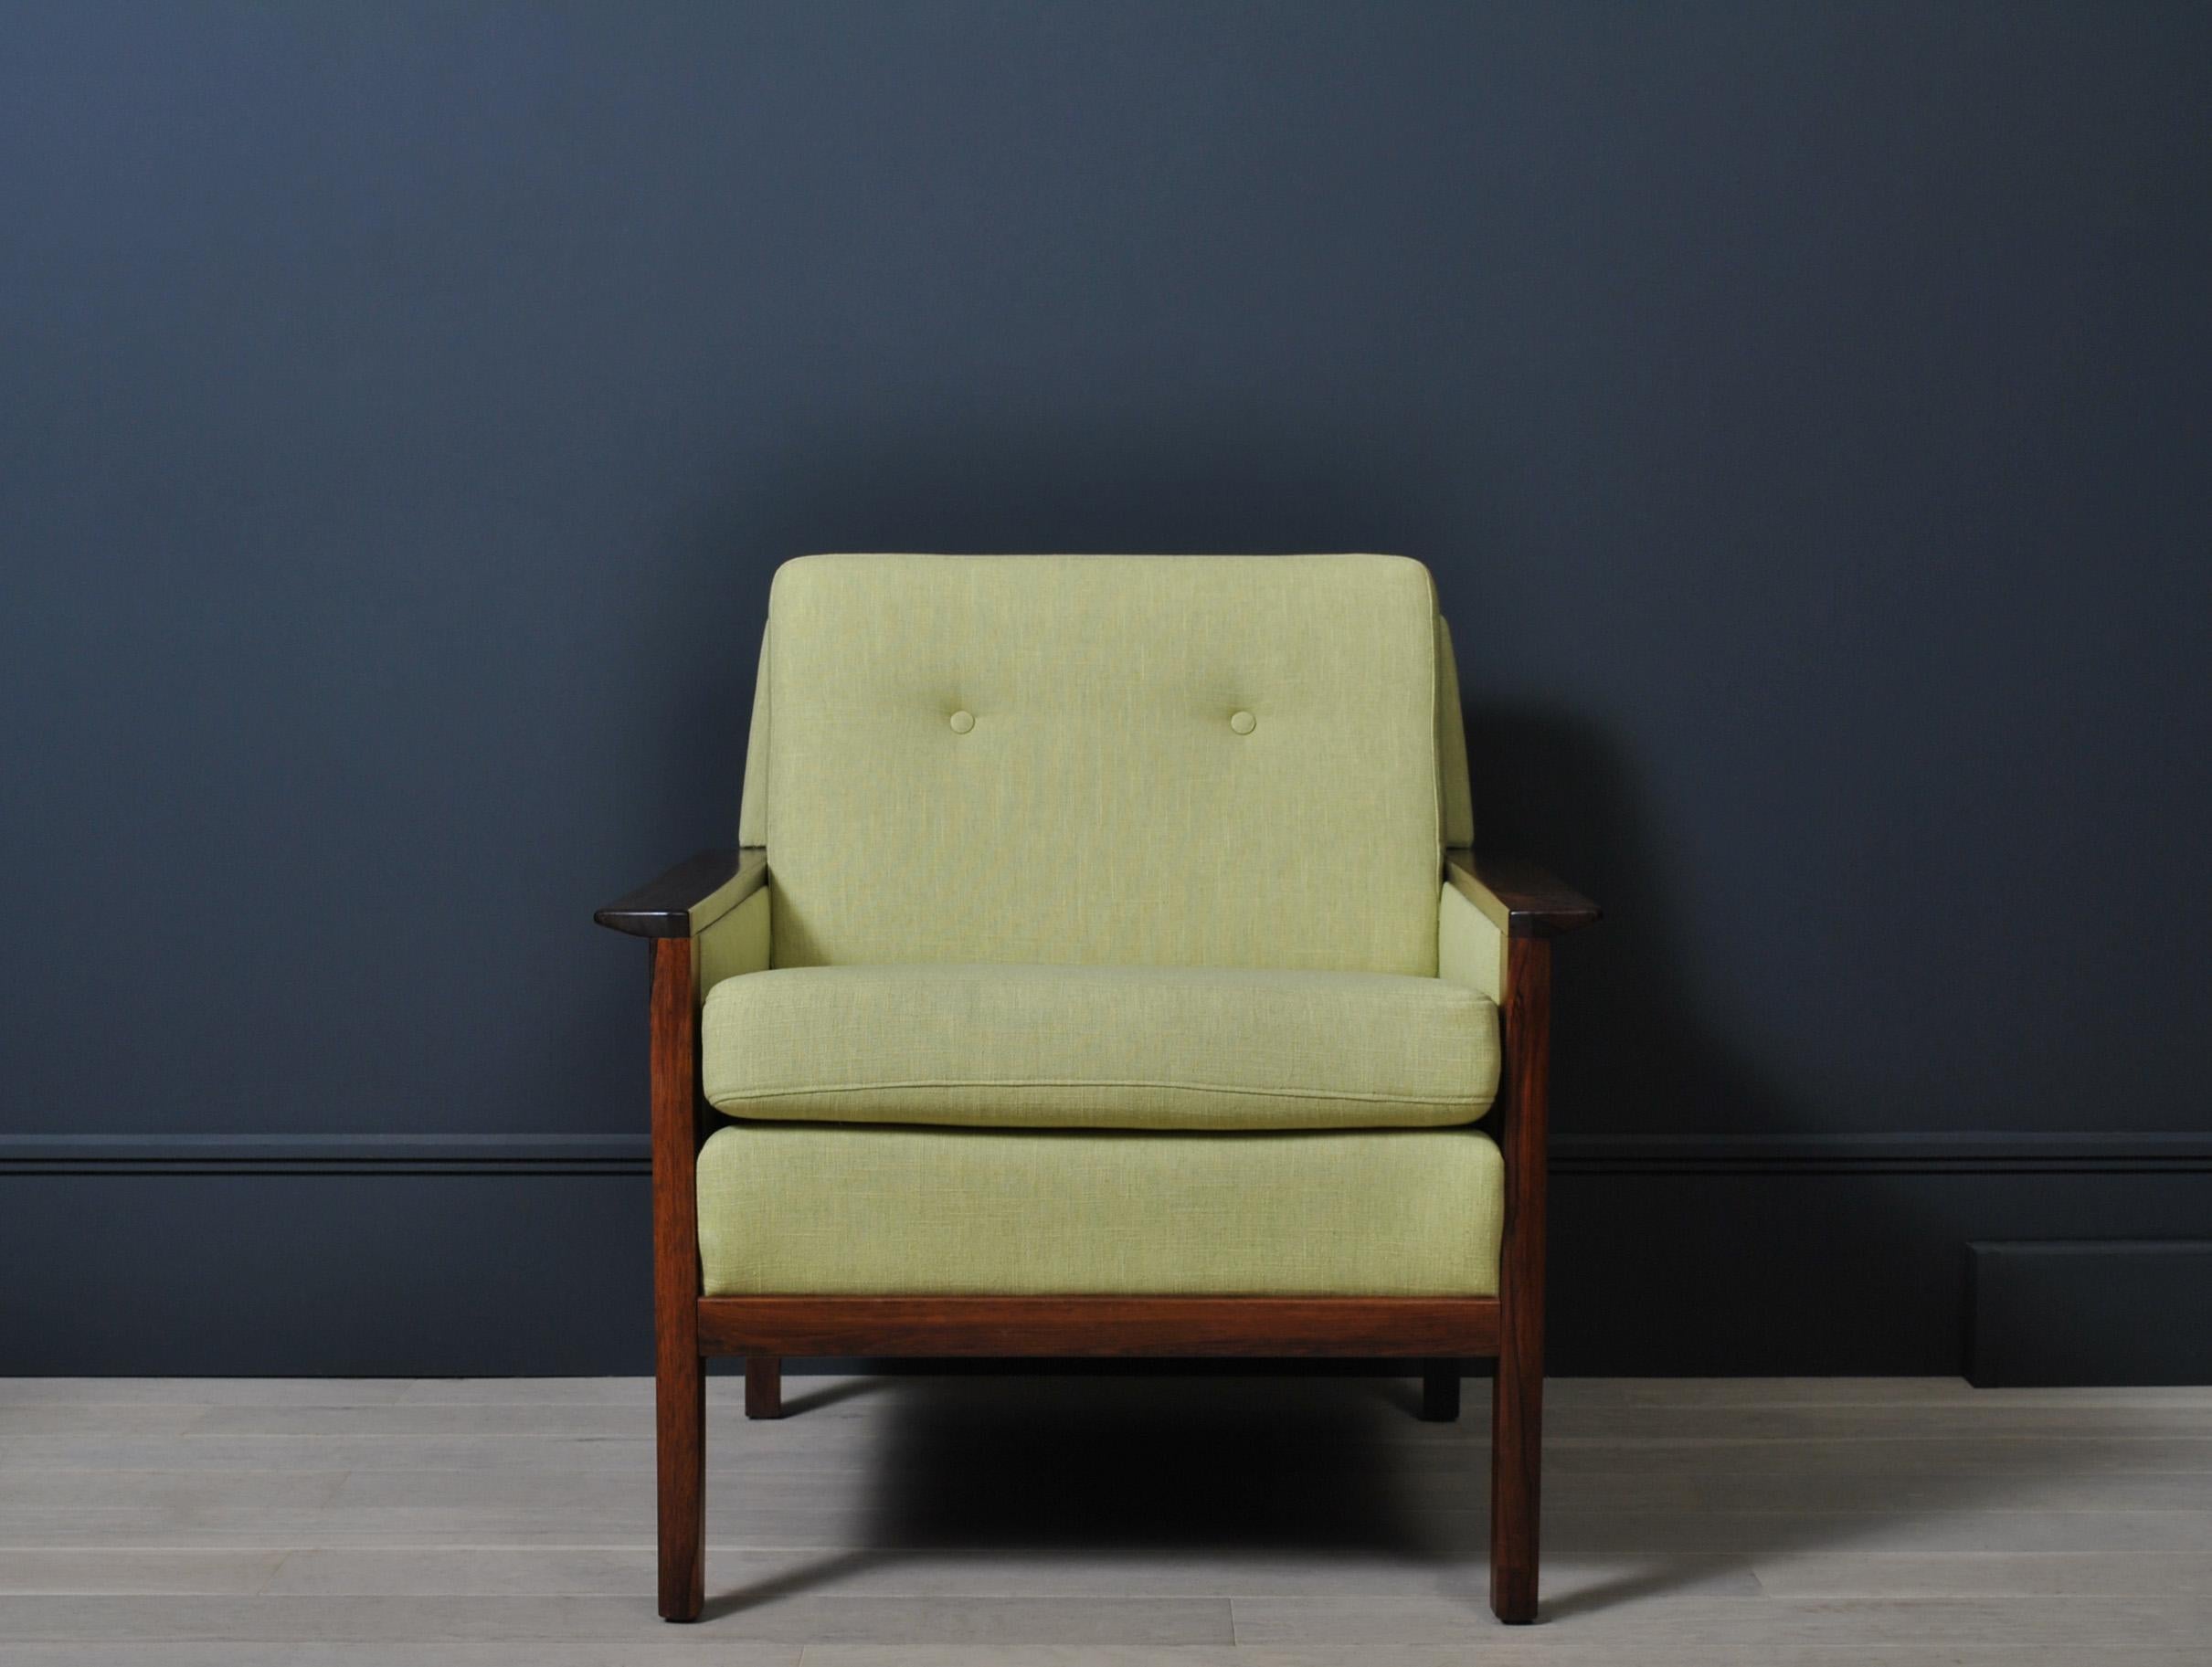 A fully reupholstered Danish midcentury lounge chair by Hans Olsen. Produced by CS Mobler, Denmark, circa 1950s. Wonderful angled wing arm frame. The entire chair has been completely reupholstered from scratch in Linwood linen fabric.
Classic